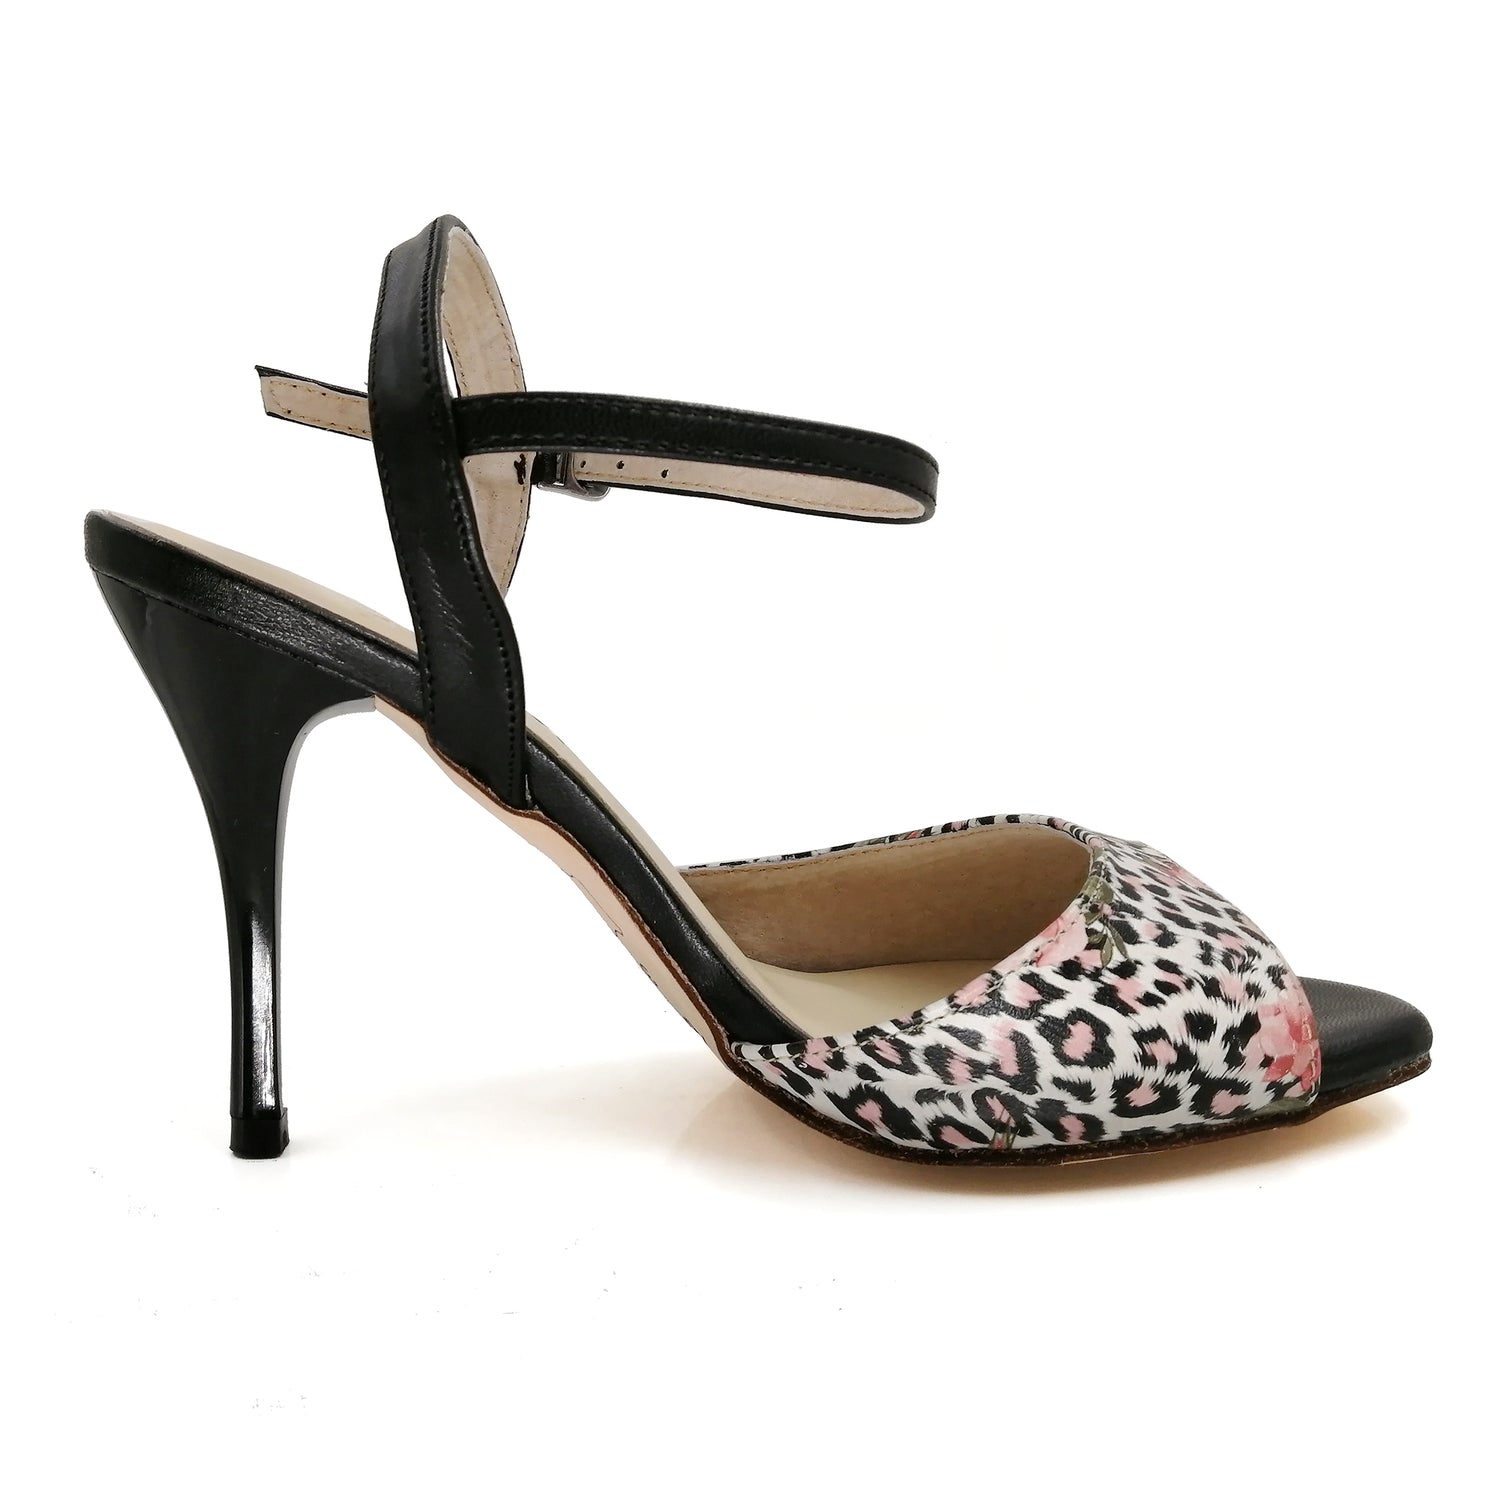 Pro Dancer Tango Shoes for Women High Heel Dance Sandals with Leather Sole in Leopard Pattern (PD-9007E)4